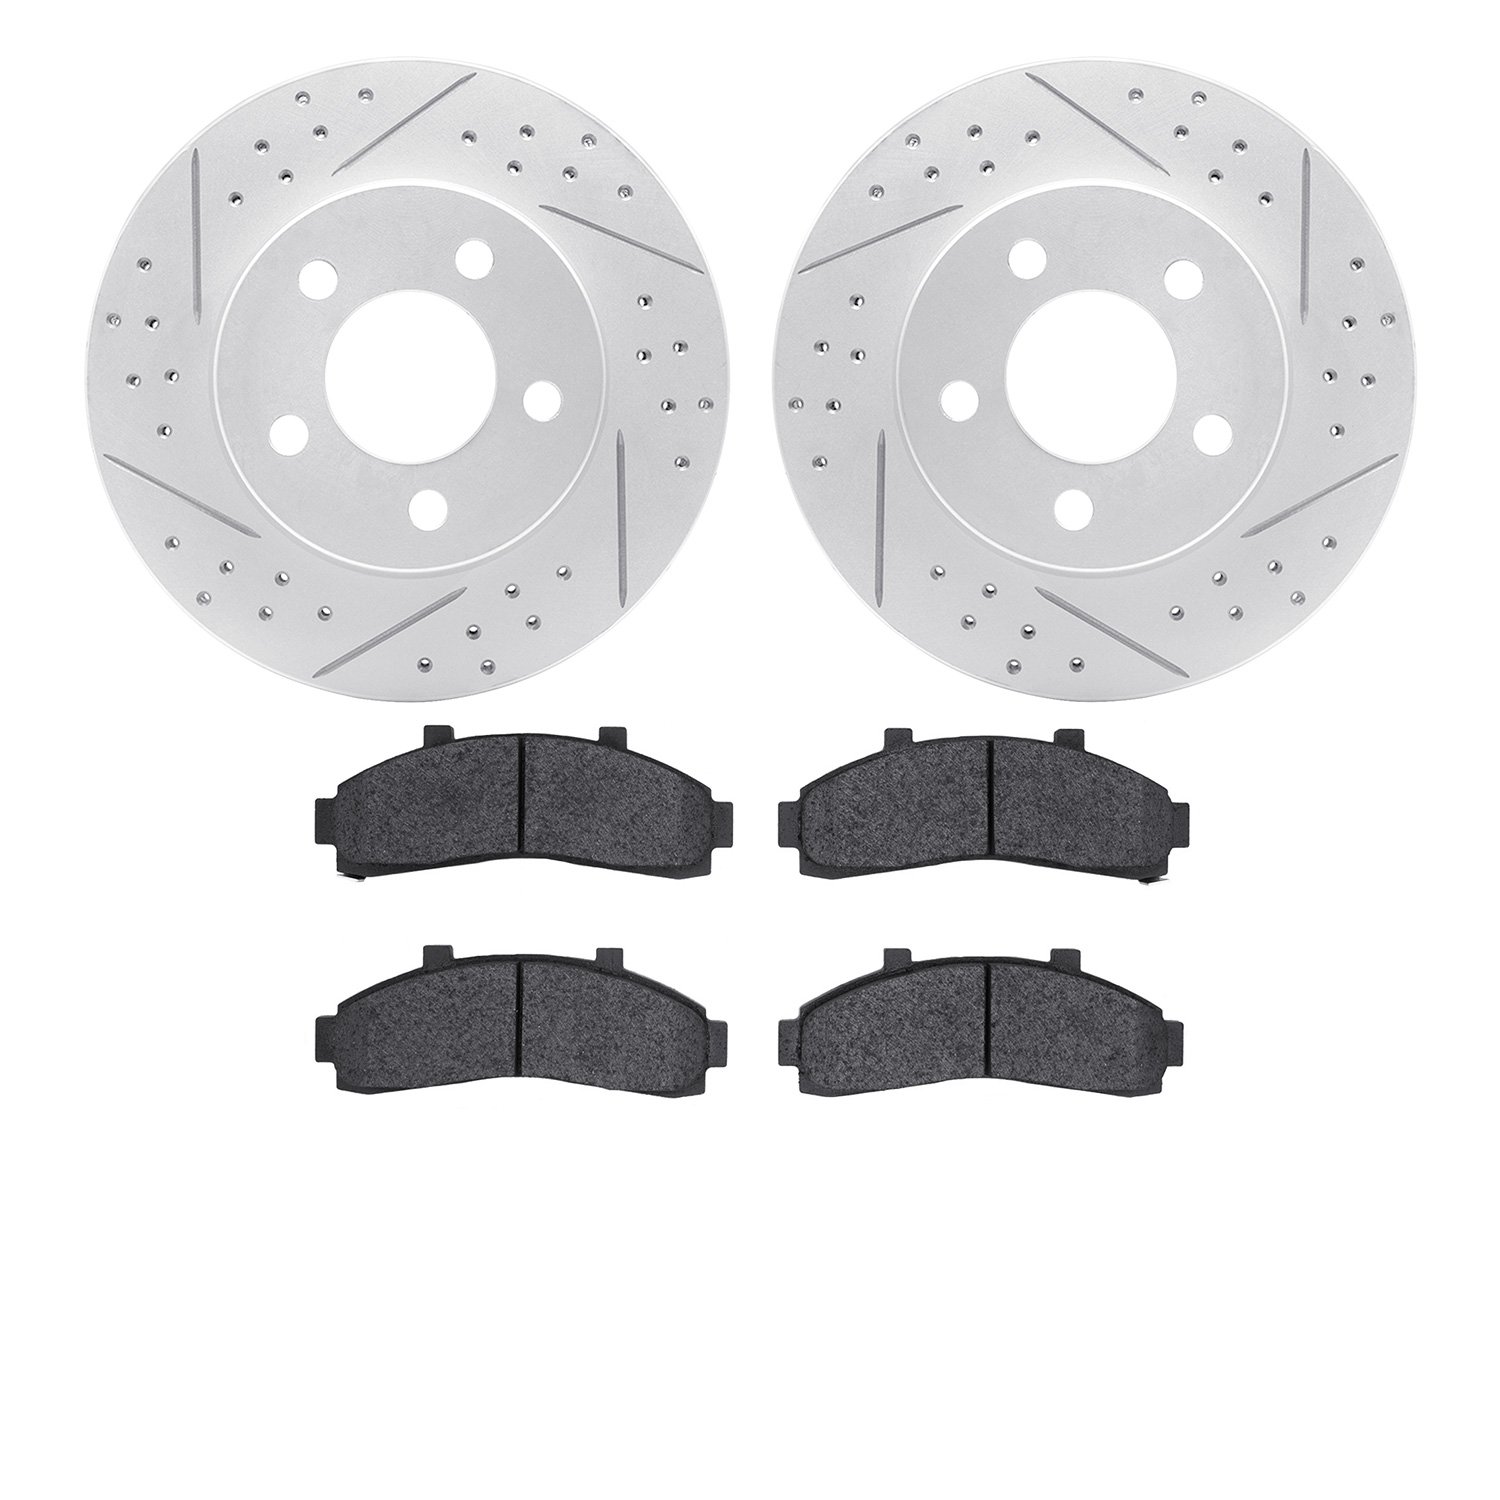 2402-54015 Geoperformance Drilled/Slotted Brake Rotors with Ultimate-Duty Brake Pads Kit, 1995-2002 Ford/Lincoln/Mercury/Mazda,